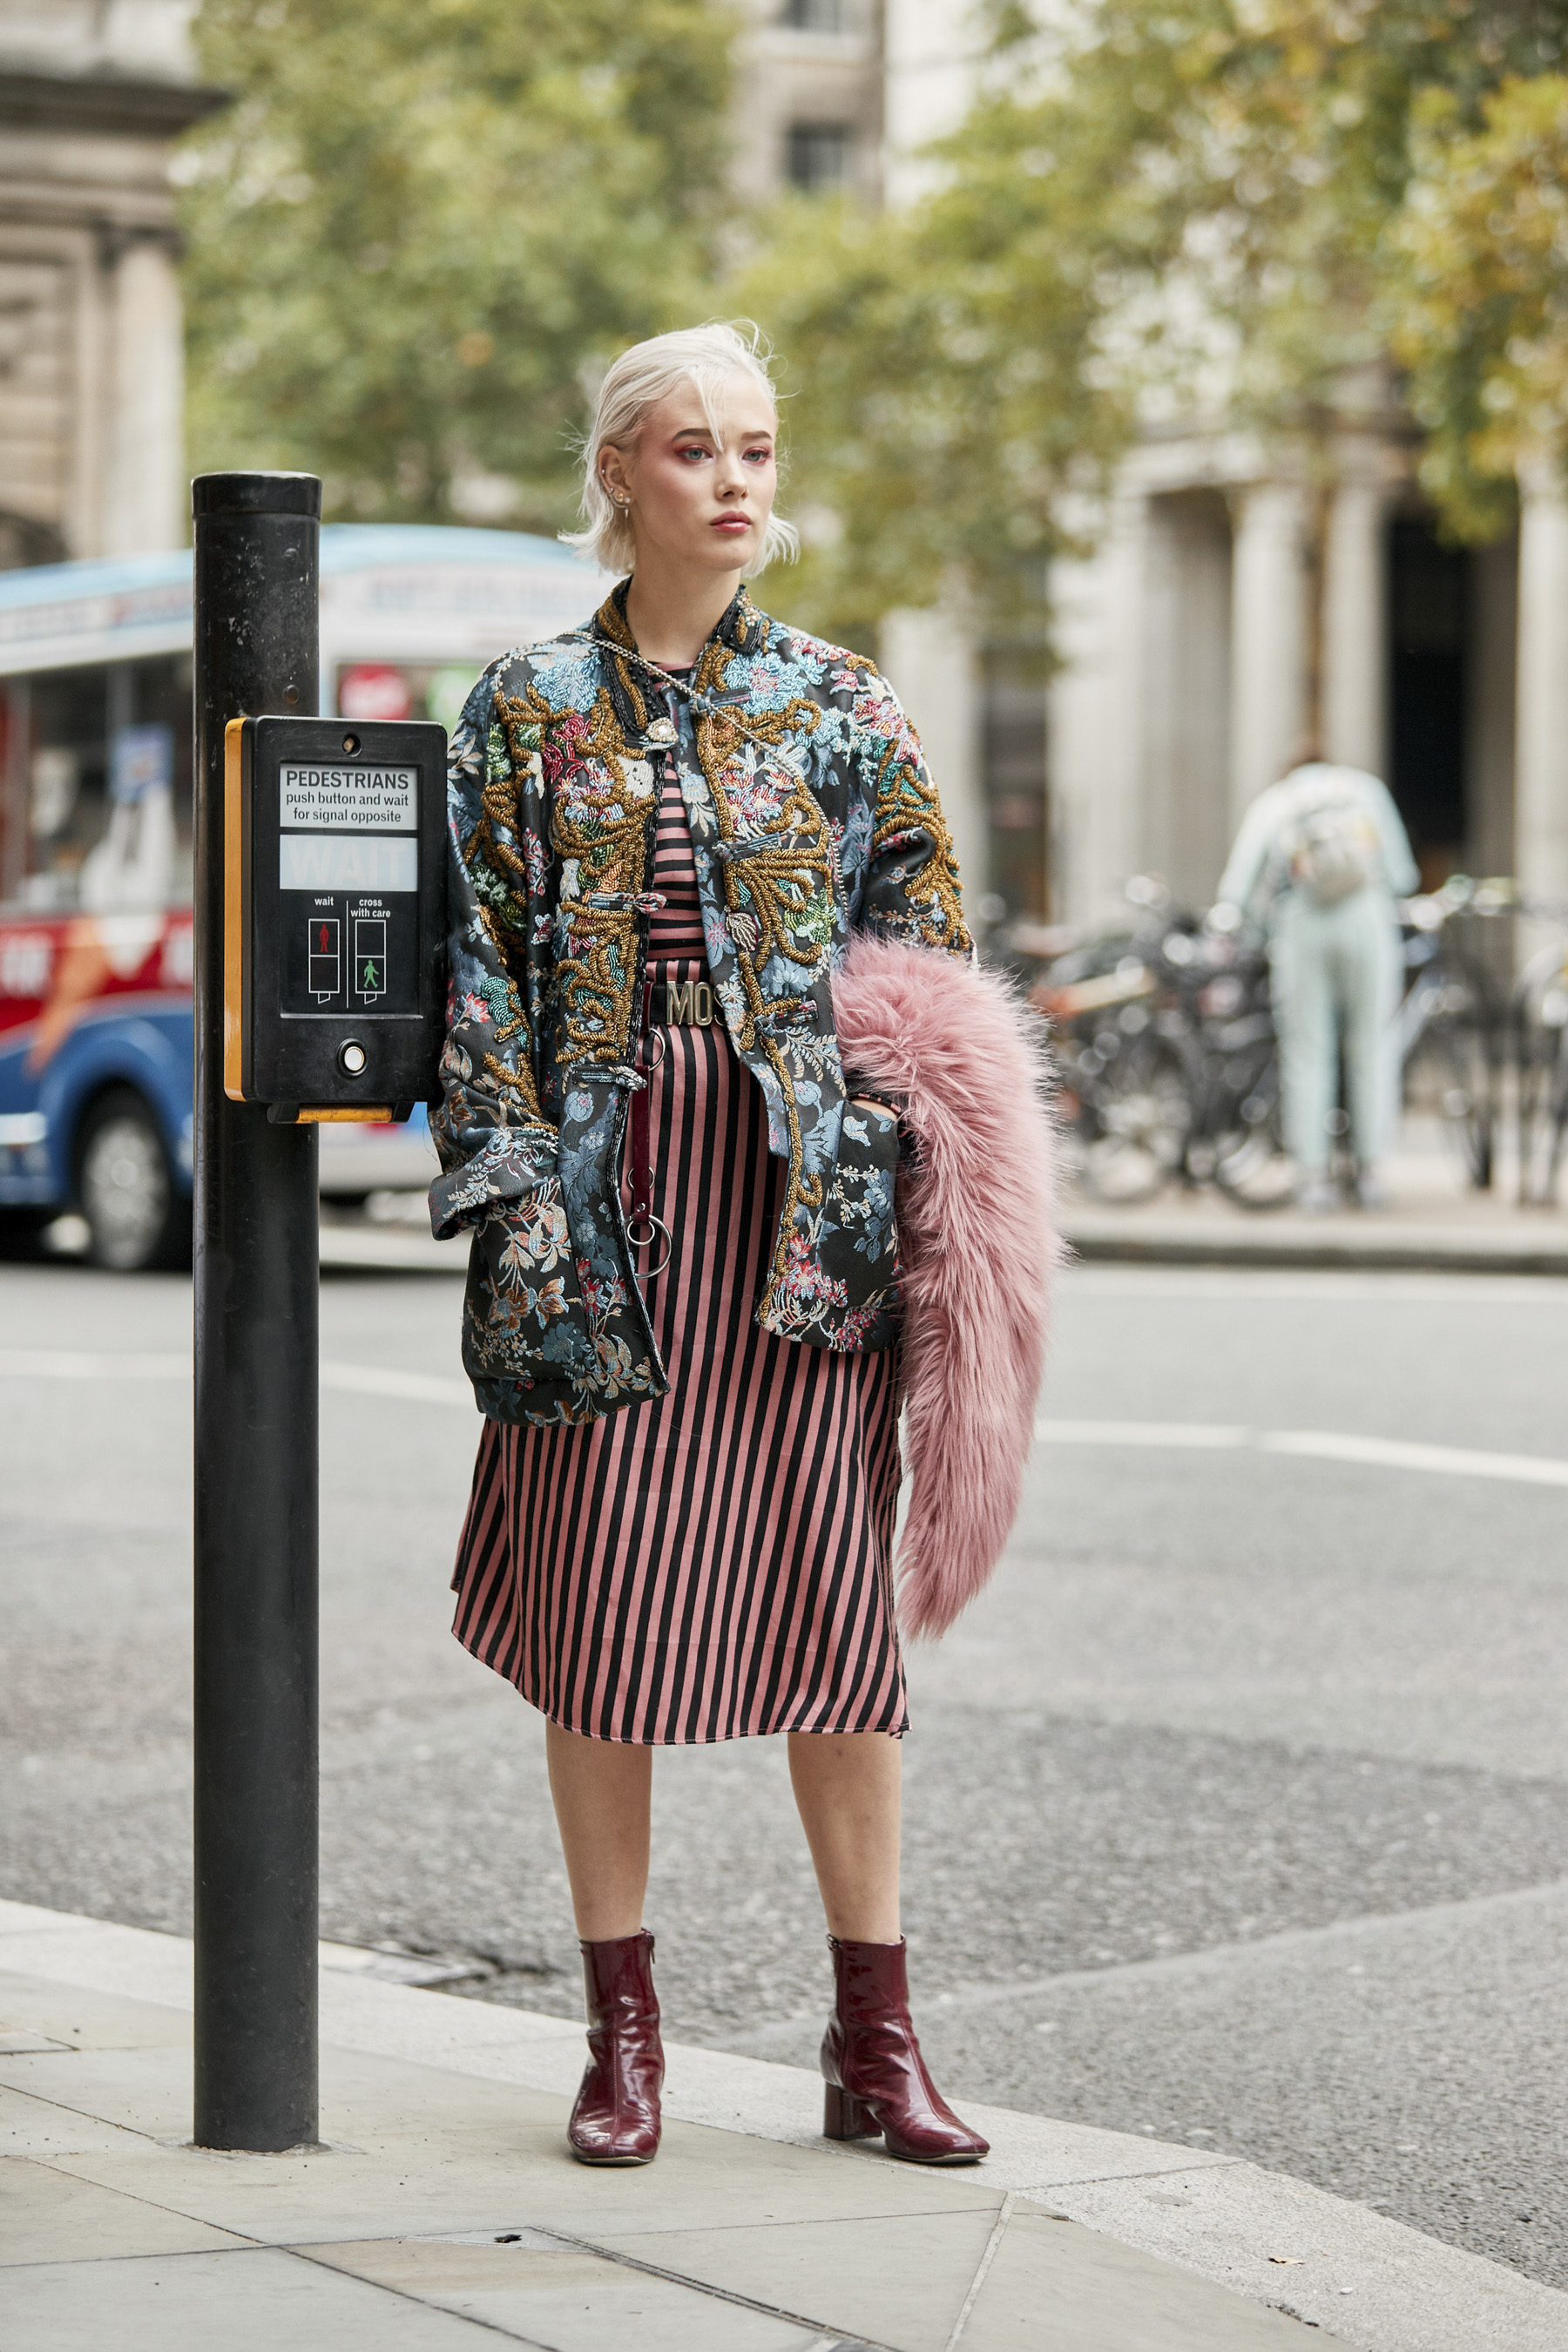 The Top 50 London Street Style Looks from Spring 2019 | The Impression